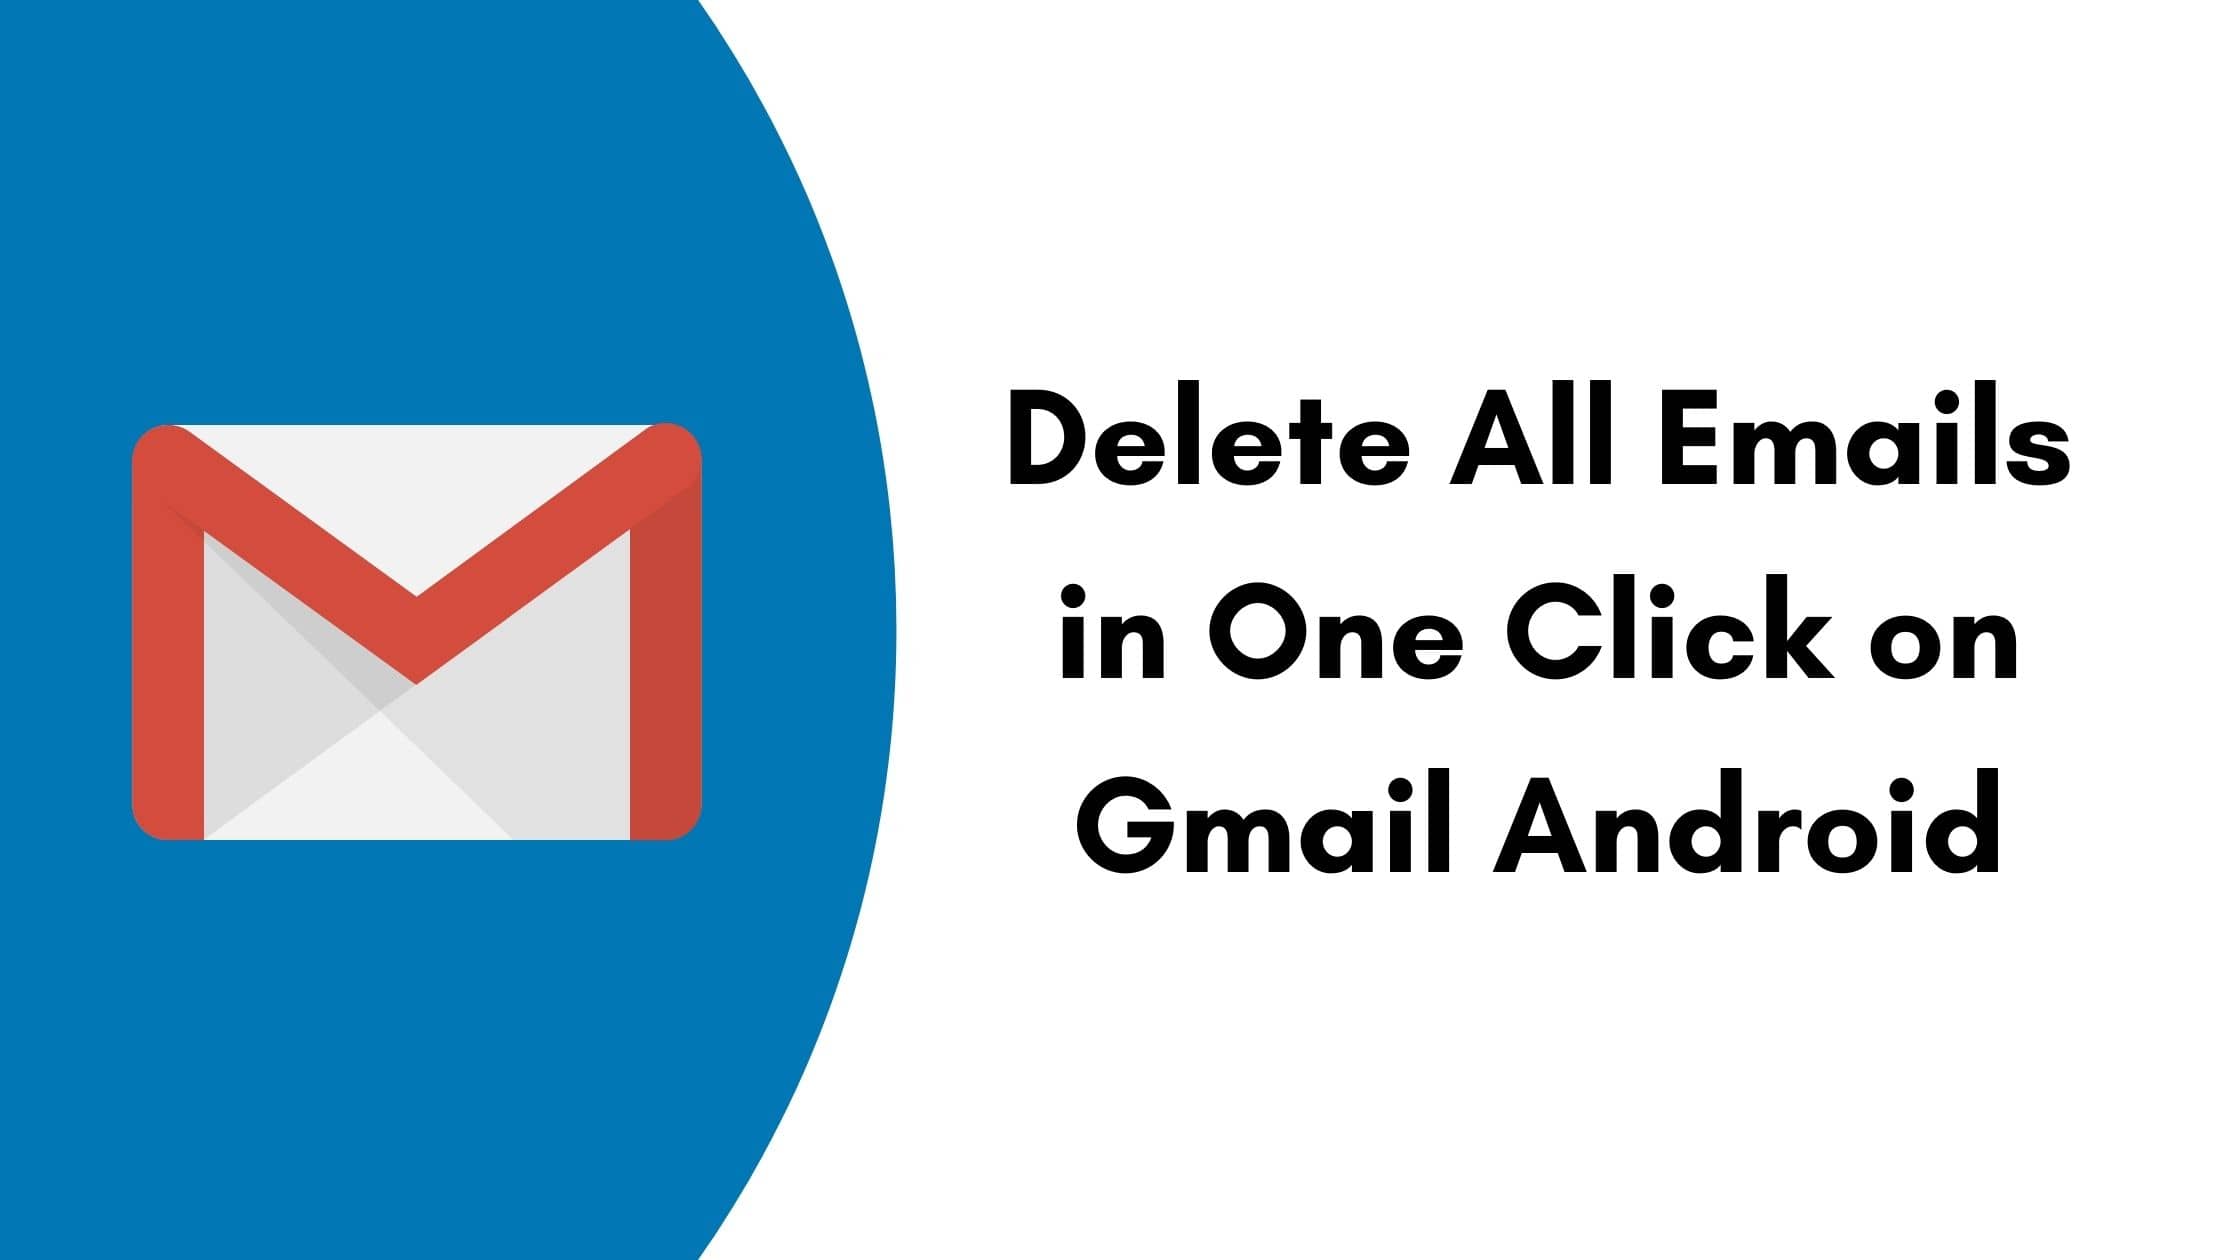 How to Delete All Emails from Gmail on Smartphone in one click